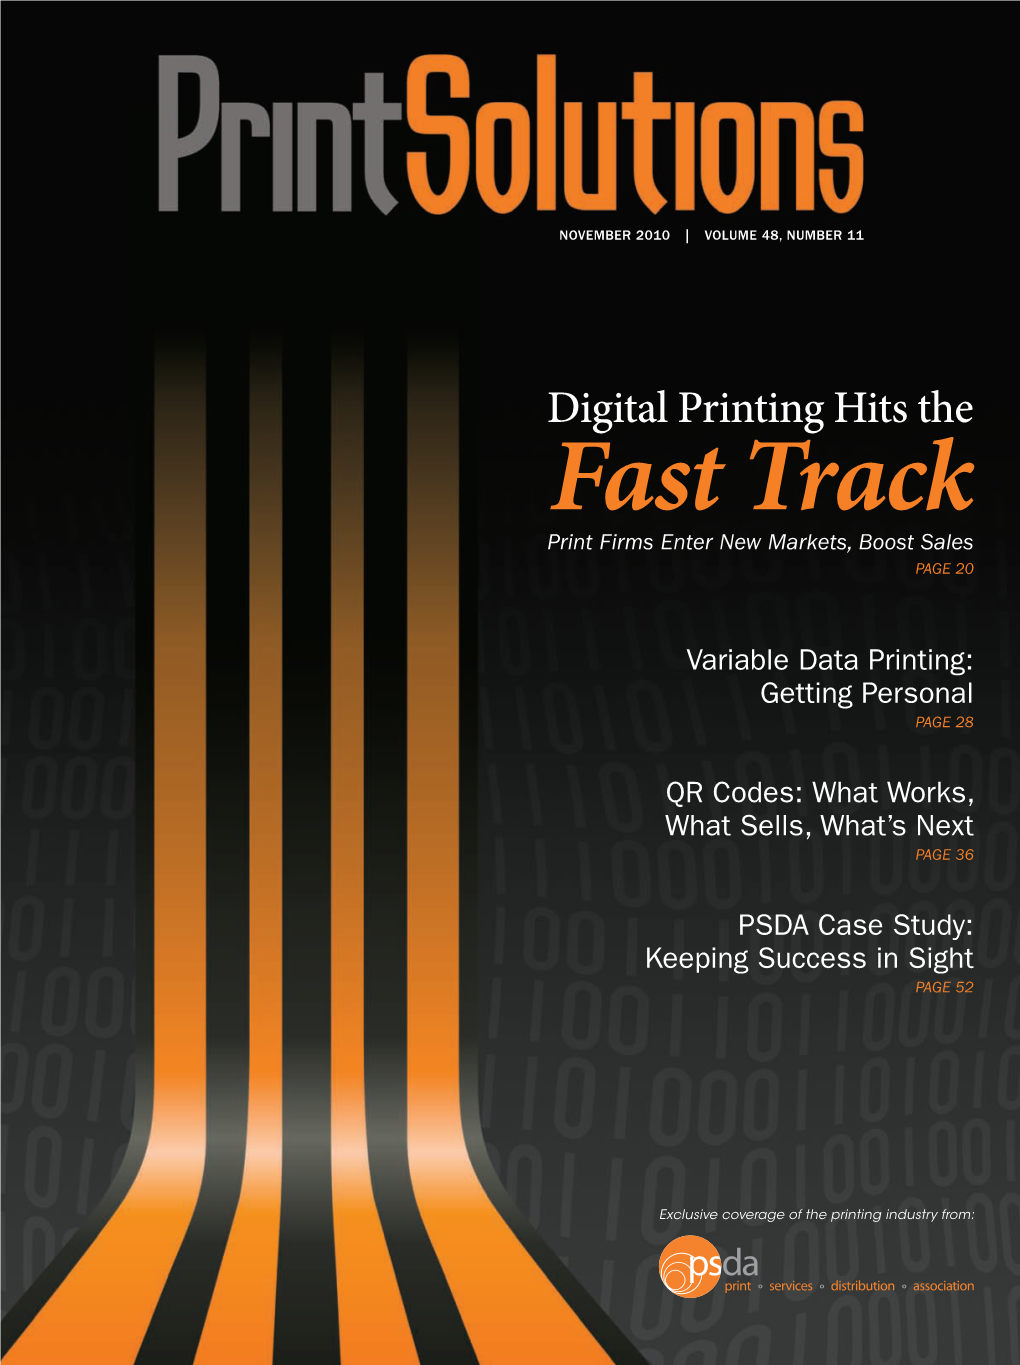 Fast Track Print Firms Enter New Markets, Boost Sales PAGE 20